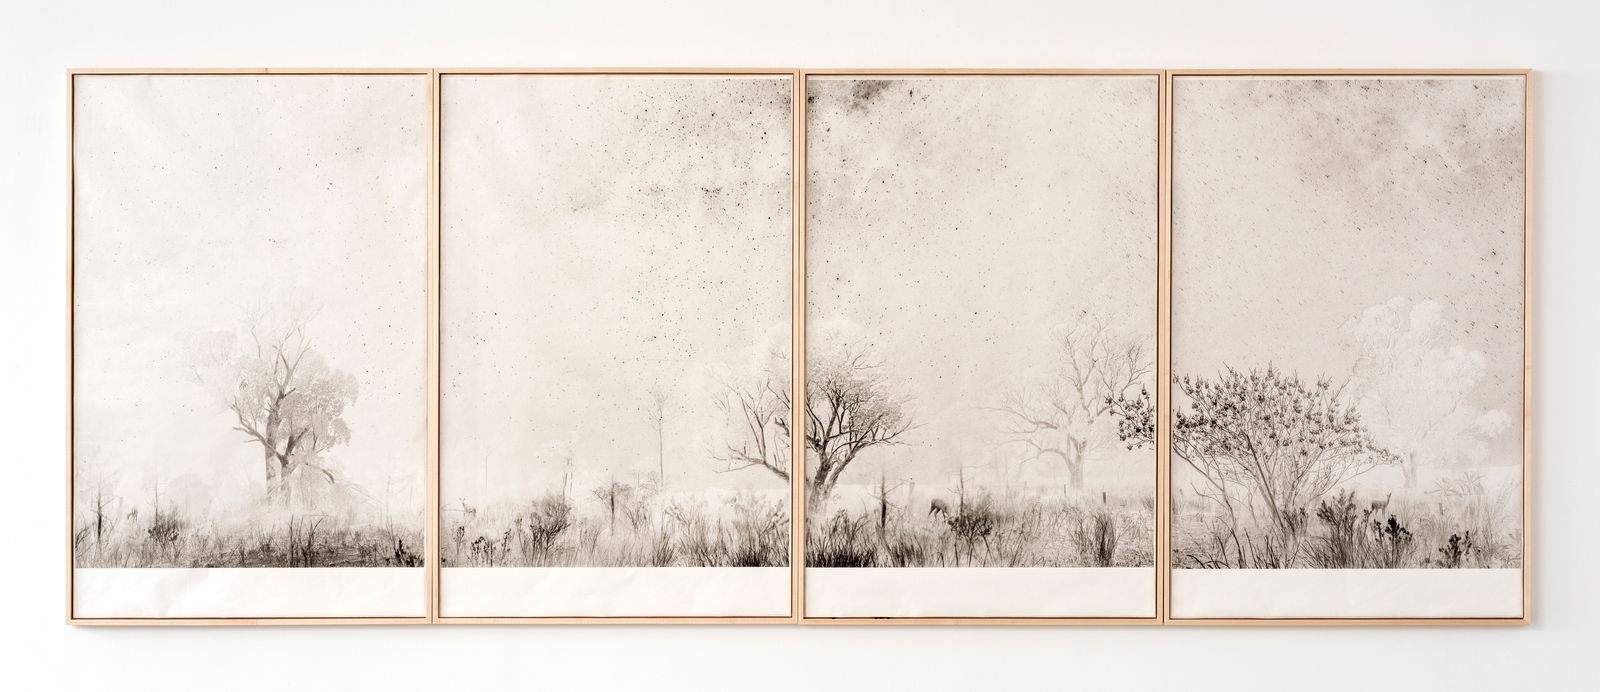 © Itamar Freed - Oh Deer (polyptych), 2019, Photography, inkjet pigment print on archival Kozo Japanese paper 138 x 380 cm